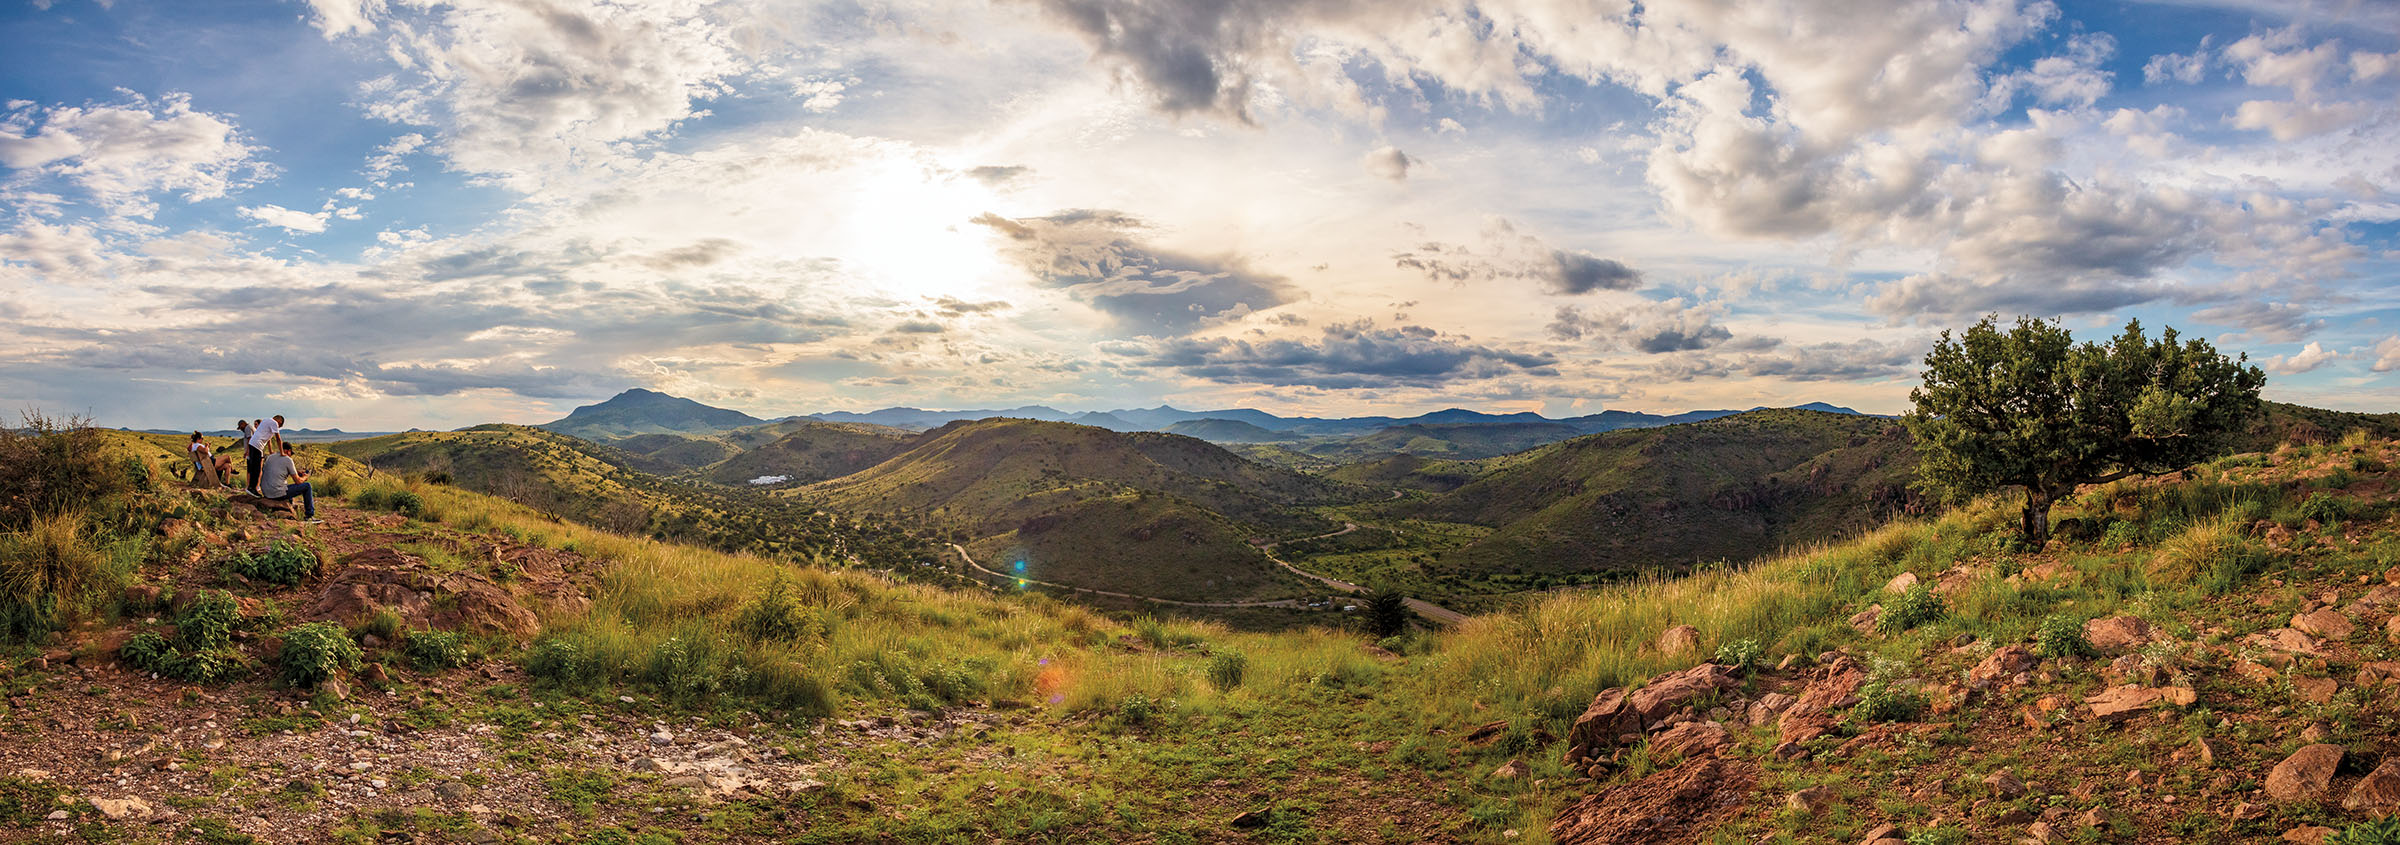 A panoramic view of the Davis Mountains under a broad blue sky with clouds and a few trees